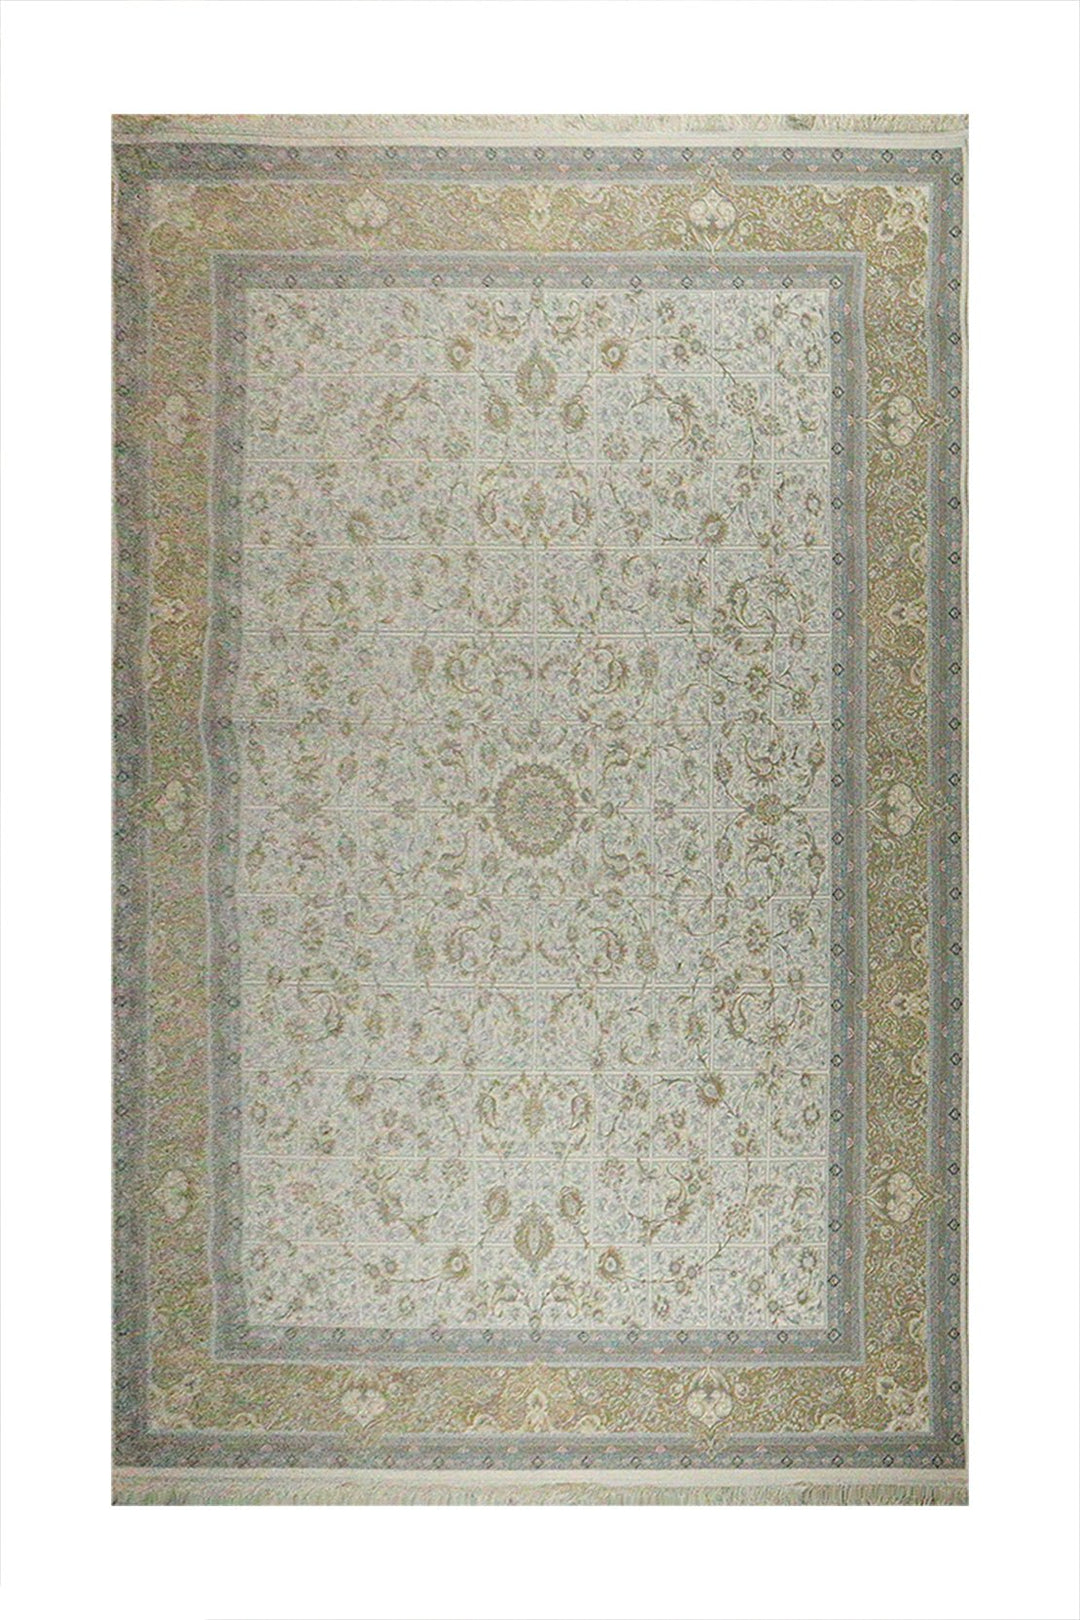 Iranian Premium Quality Hedyeh Collection (1000) Rug - 8.2 x 11. FT - Beige - Resilient Construction for Long-Lasting Use - V Surfaces